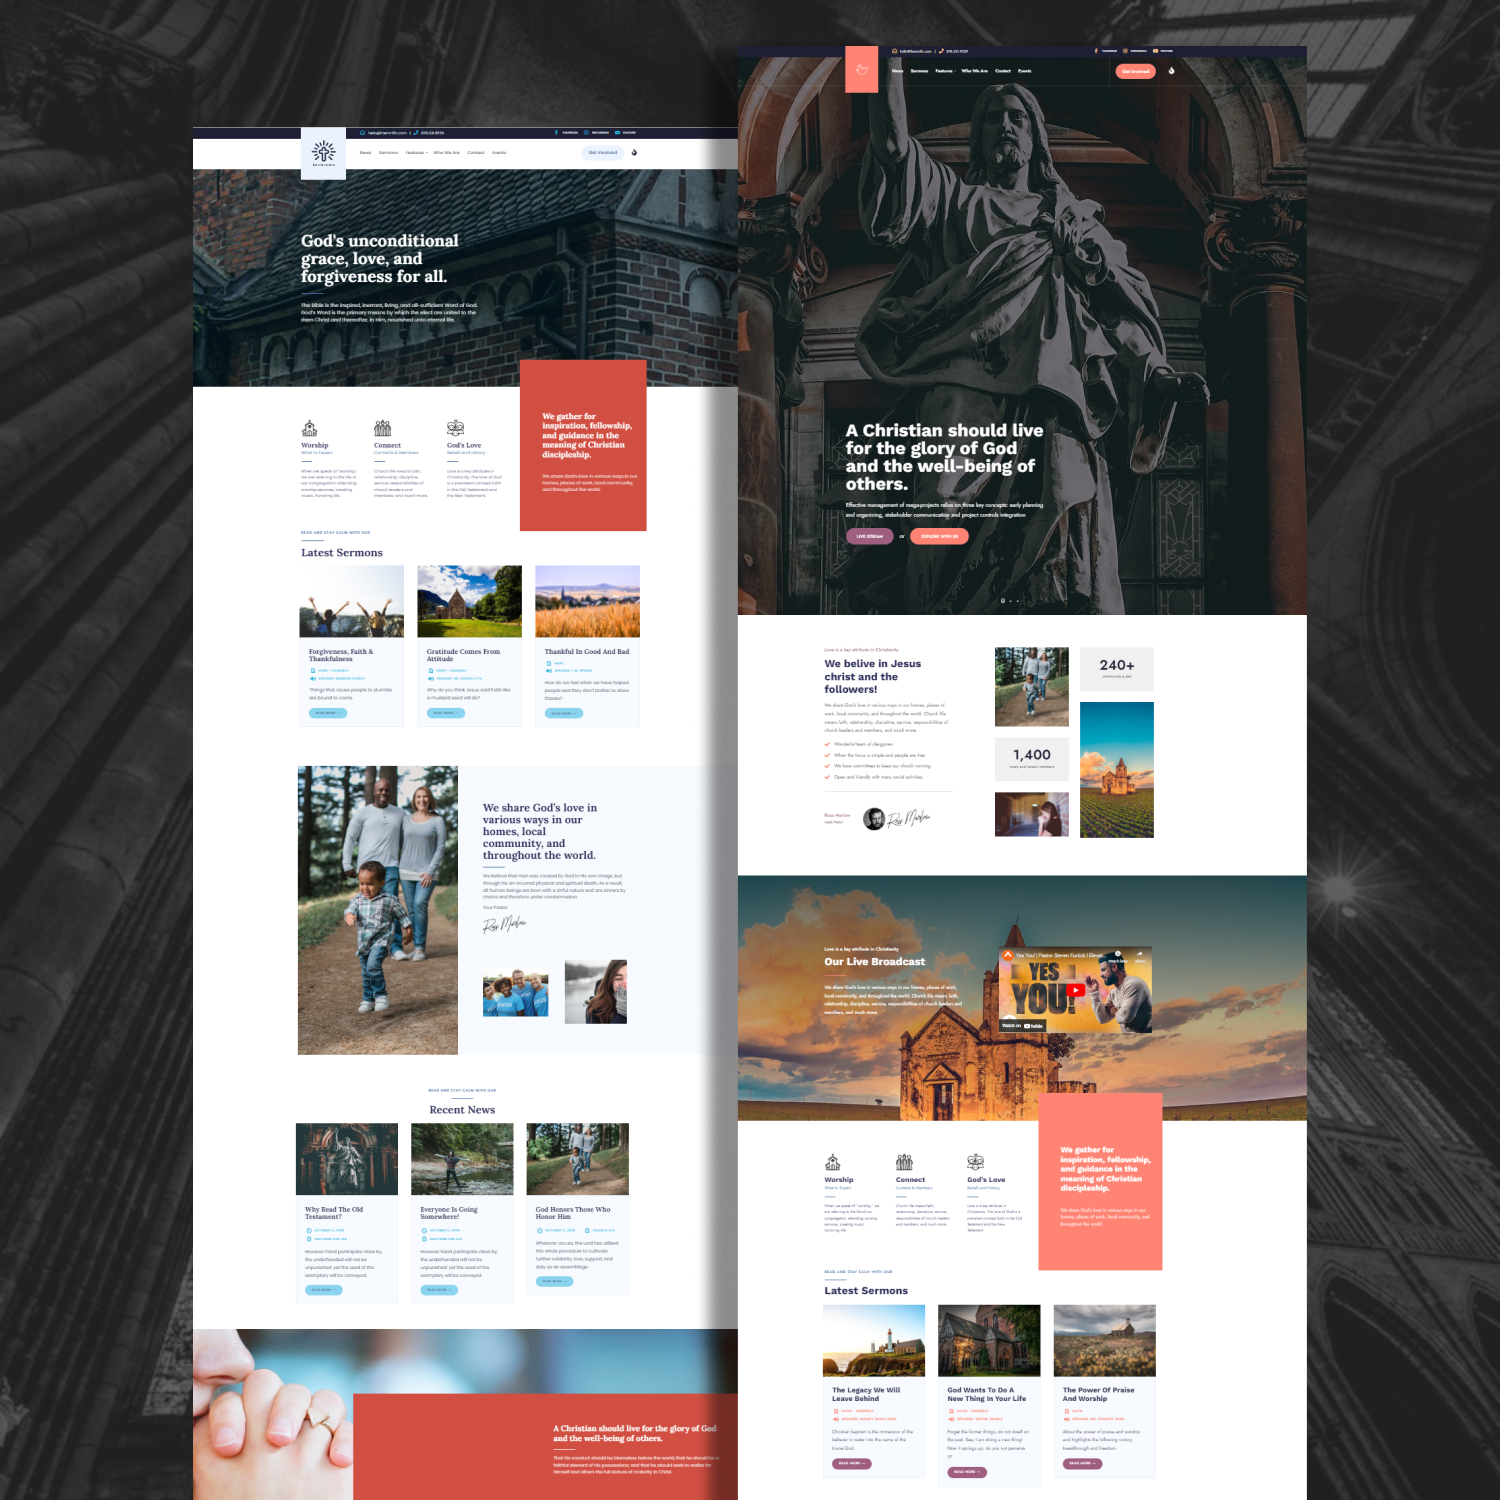 Preview images with religionis church wordpress theme.